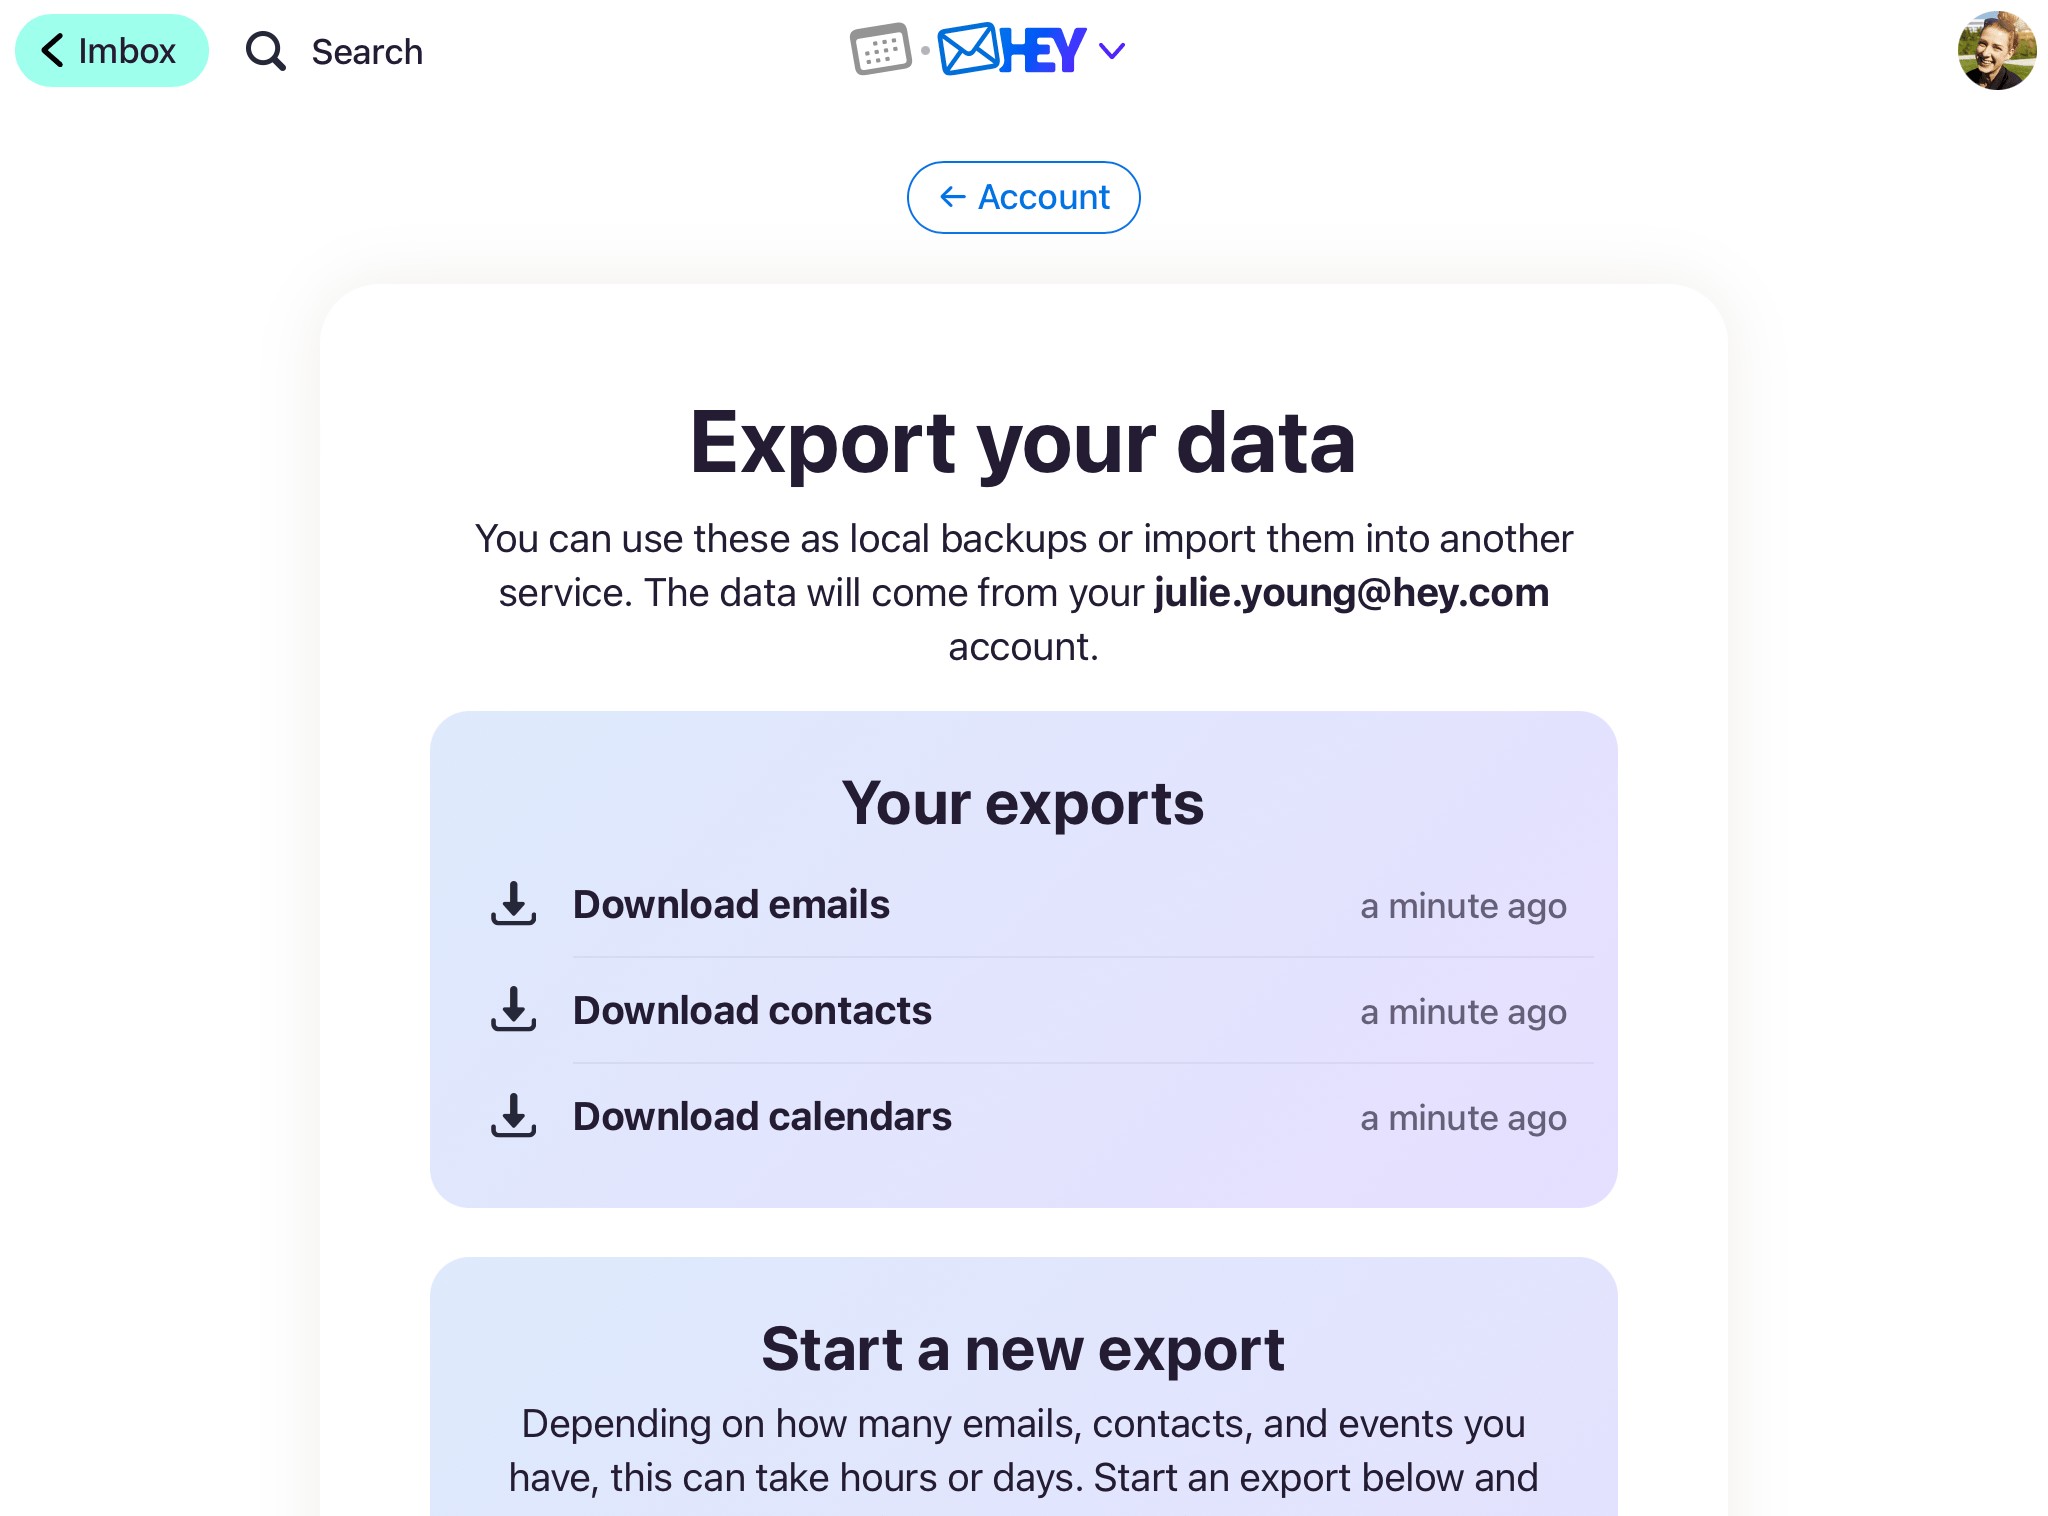 Exported data, ready to download